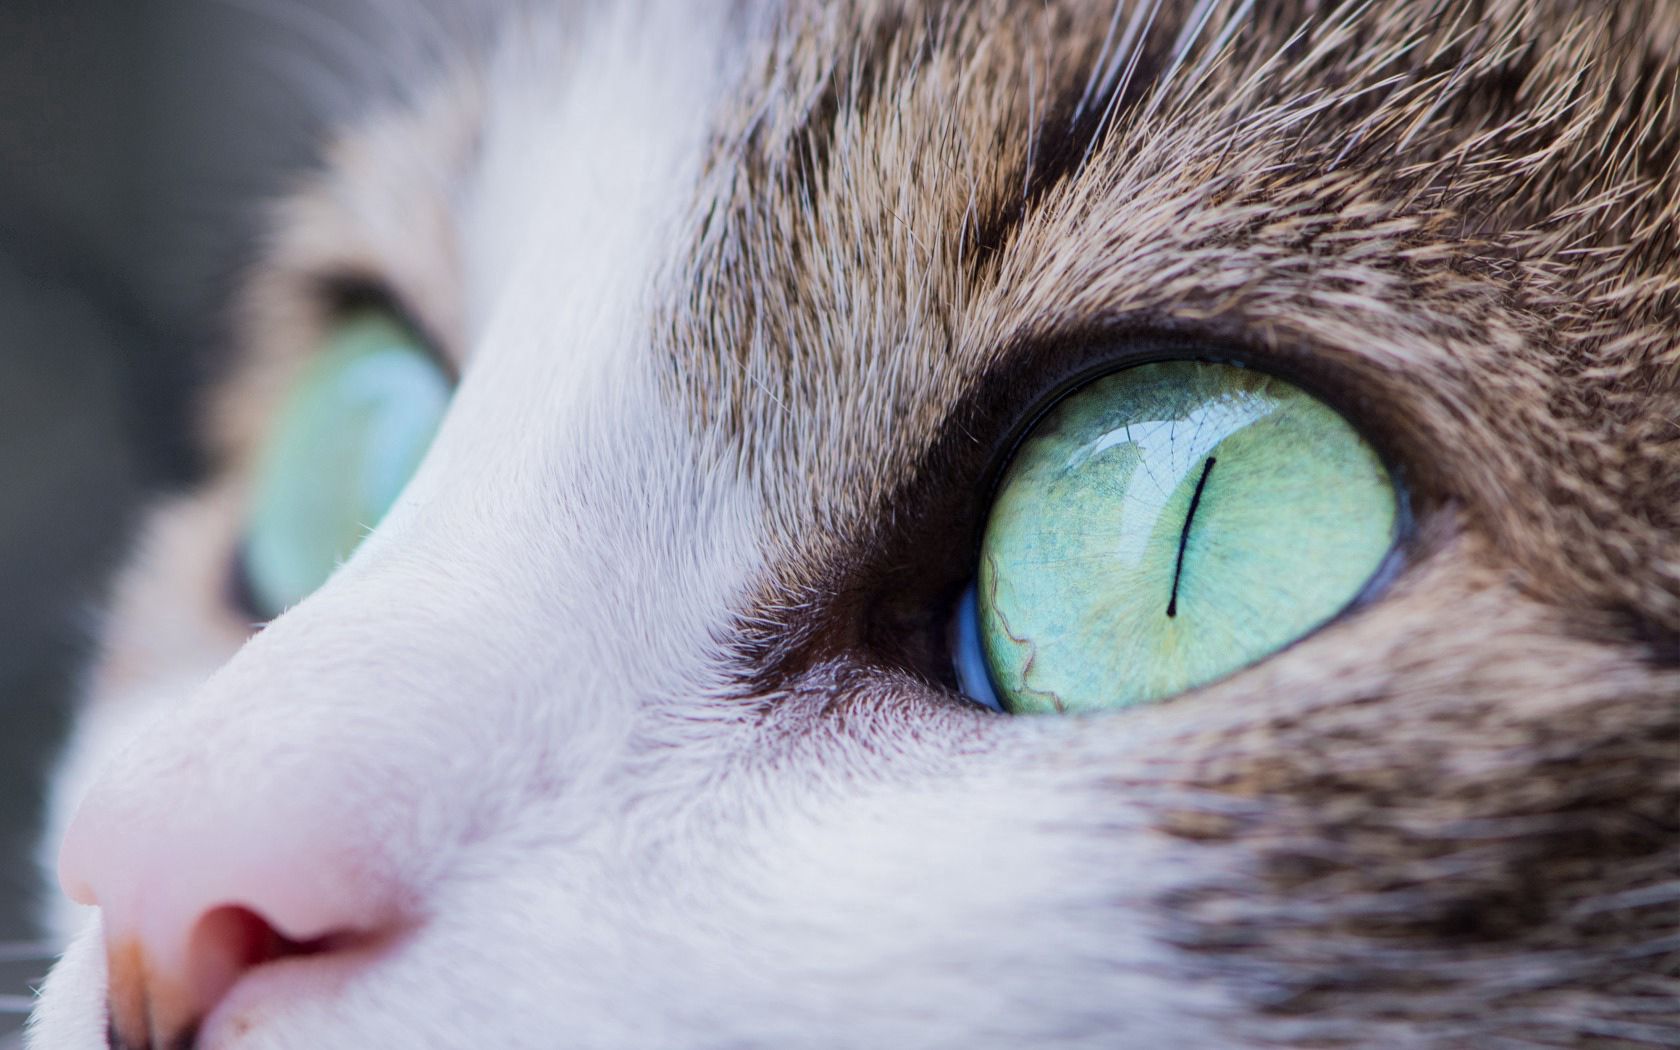 New Lock Screen Wallpapers animals, cat, muzzle, eyes